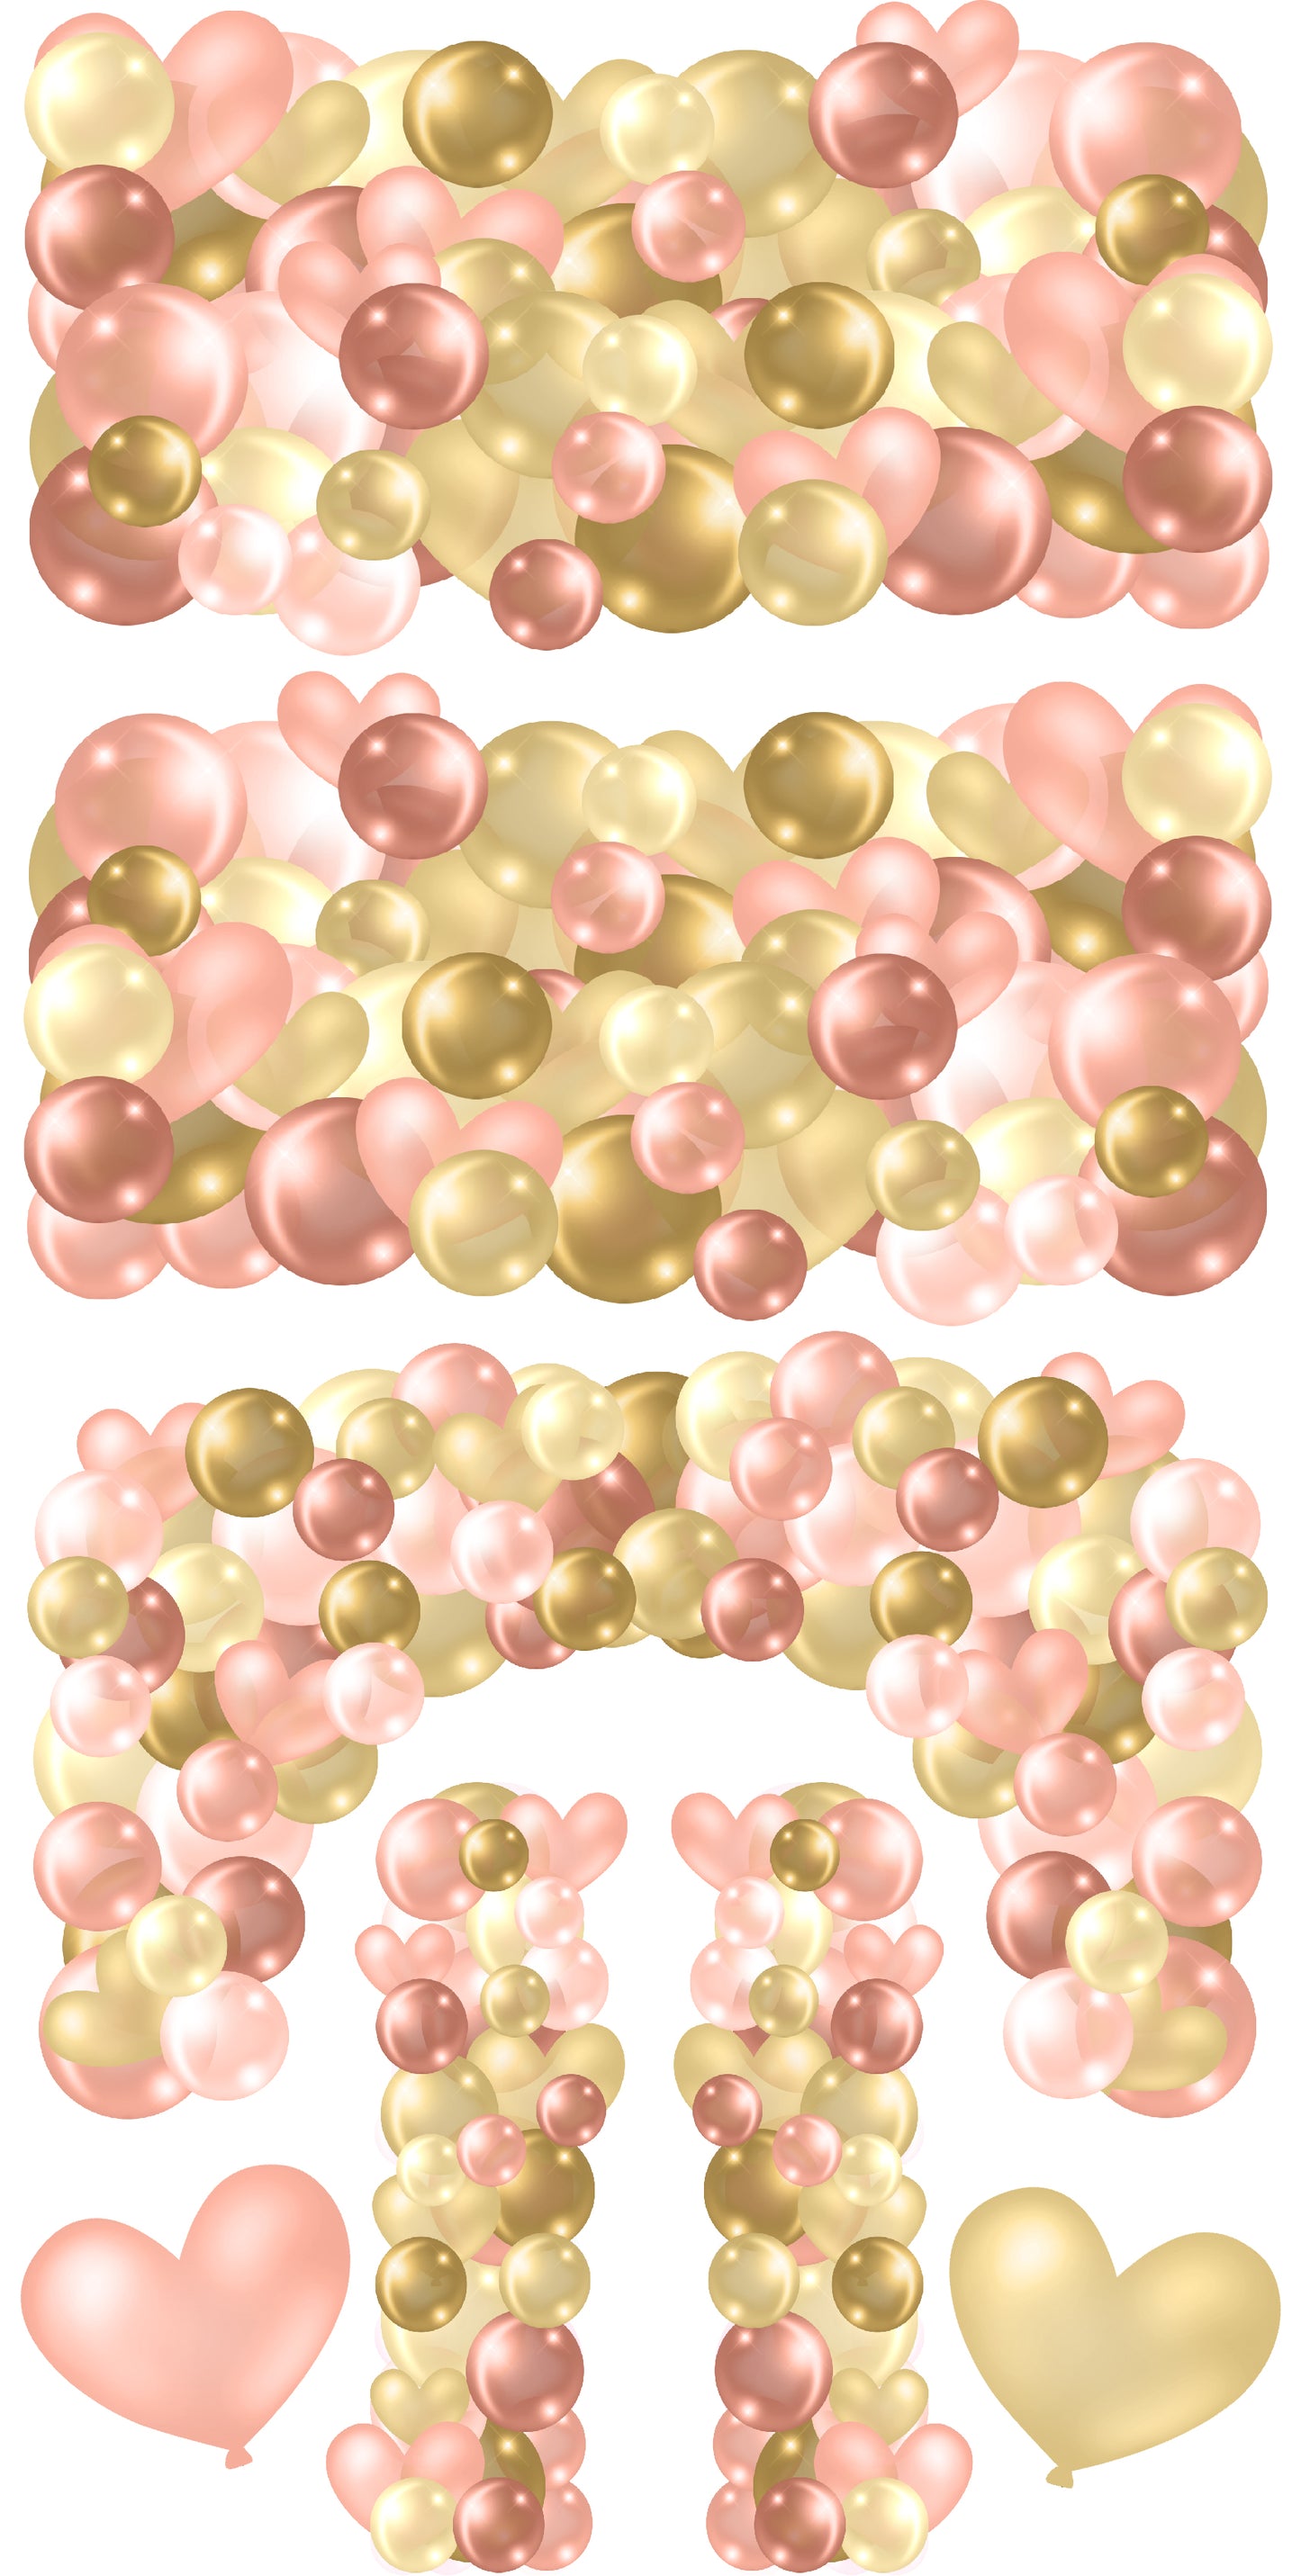 Rose Gold and Gold Balloons Bunches Skirts, Ez Fillers, Arch, and Column